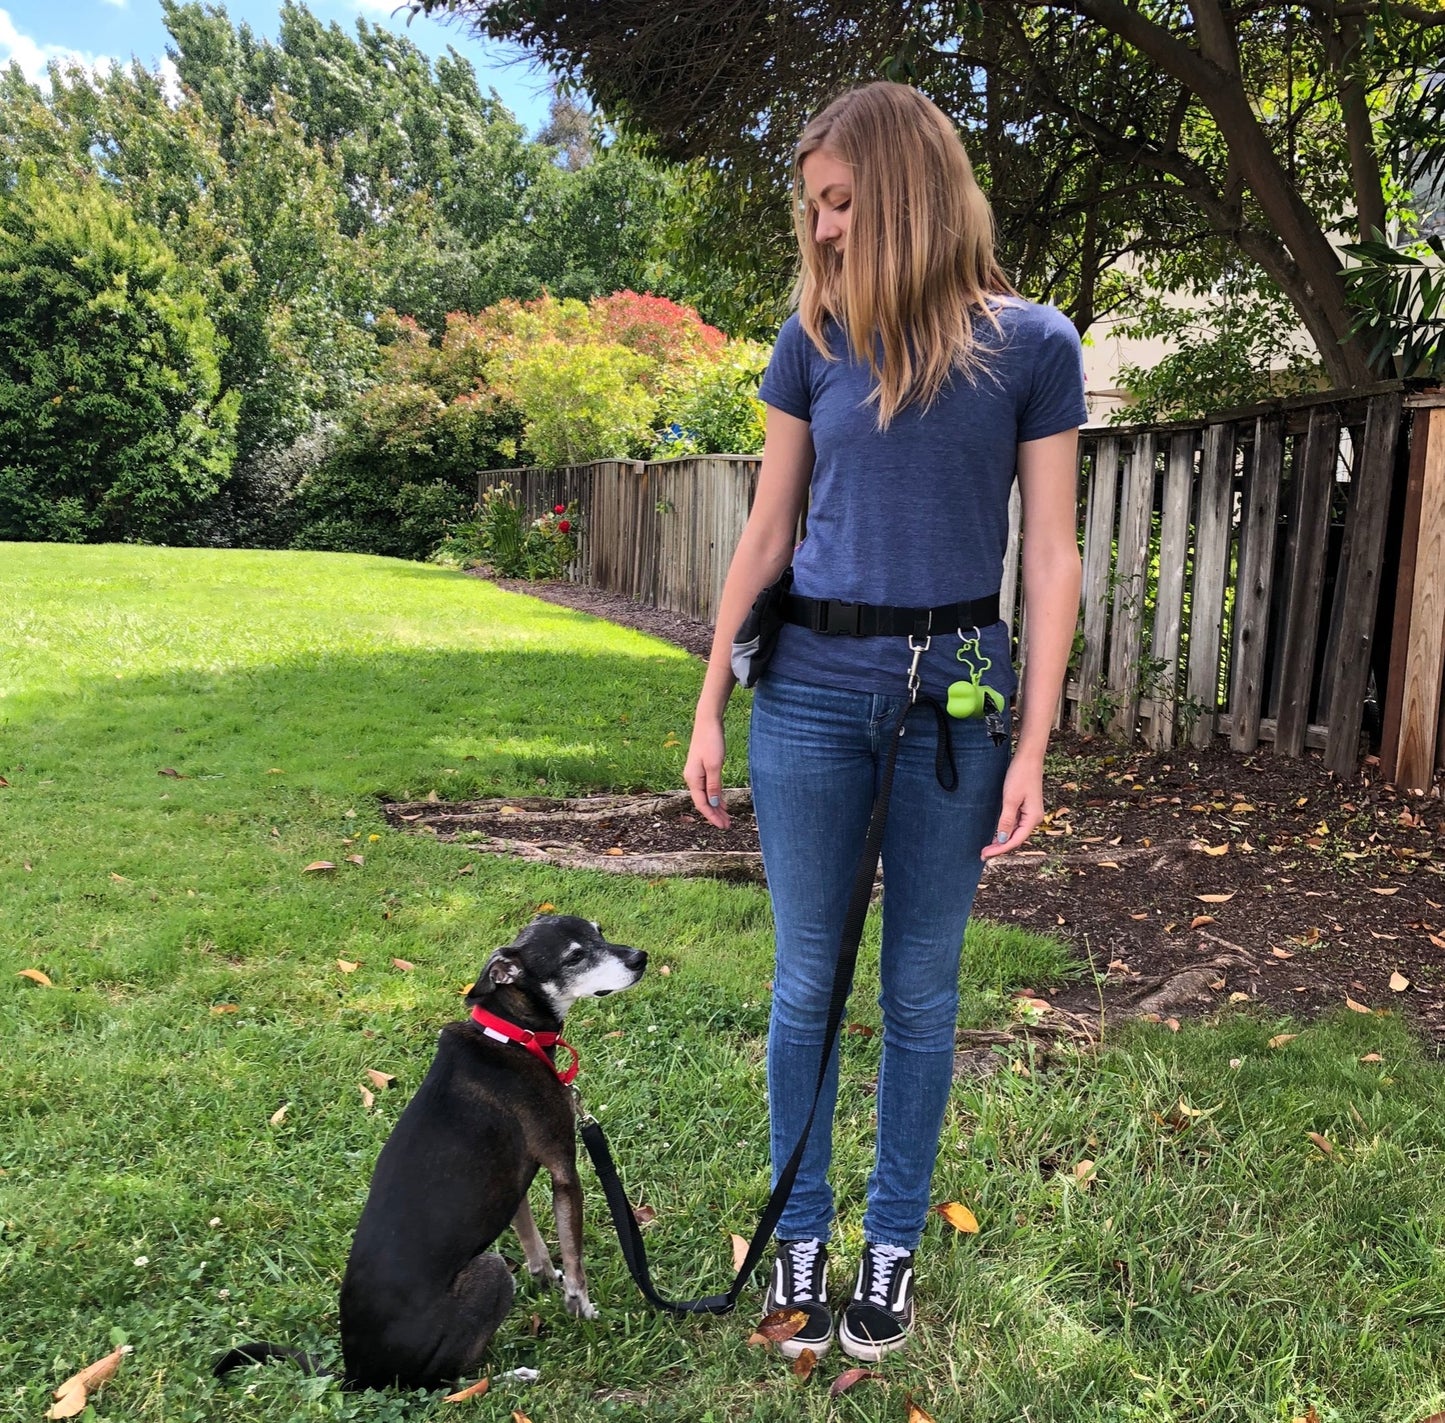 a photo of a your woman standing on grass with a black dog wearing a leash attached to her with a belt